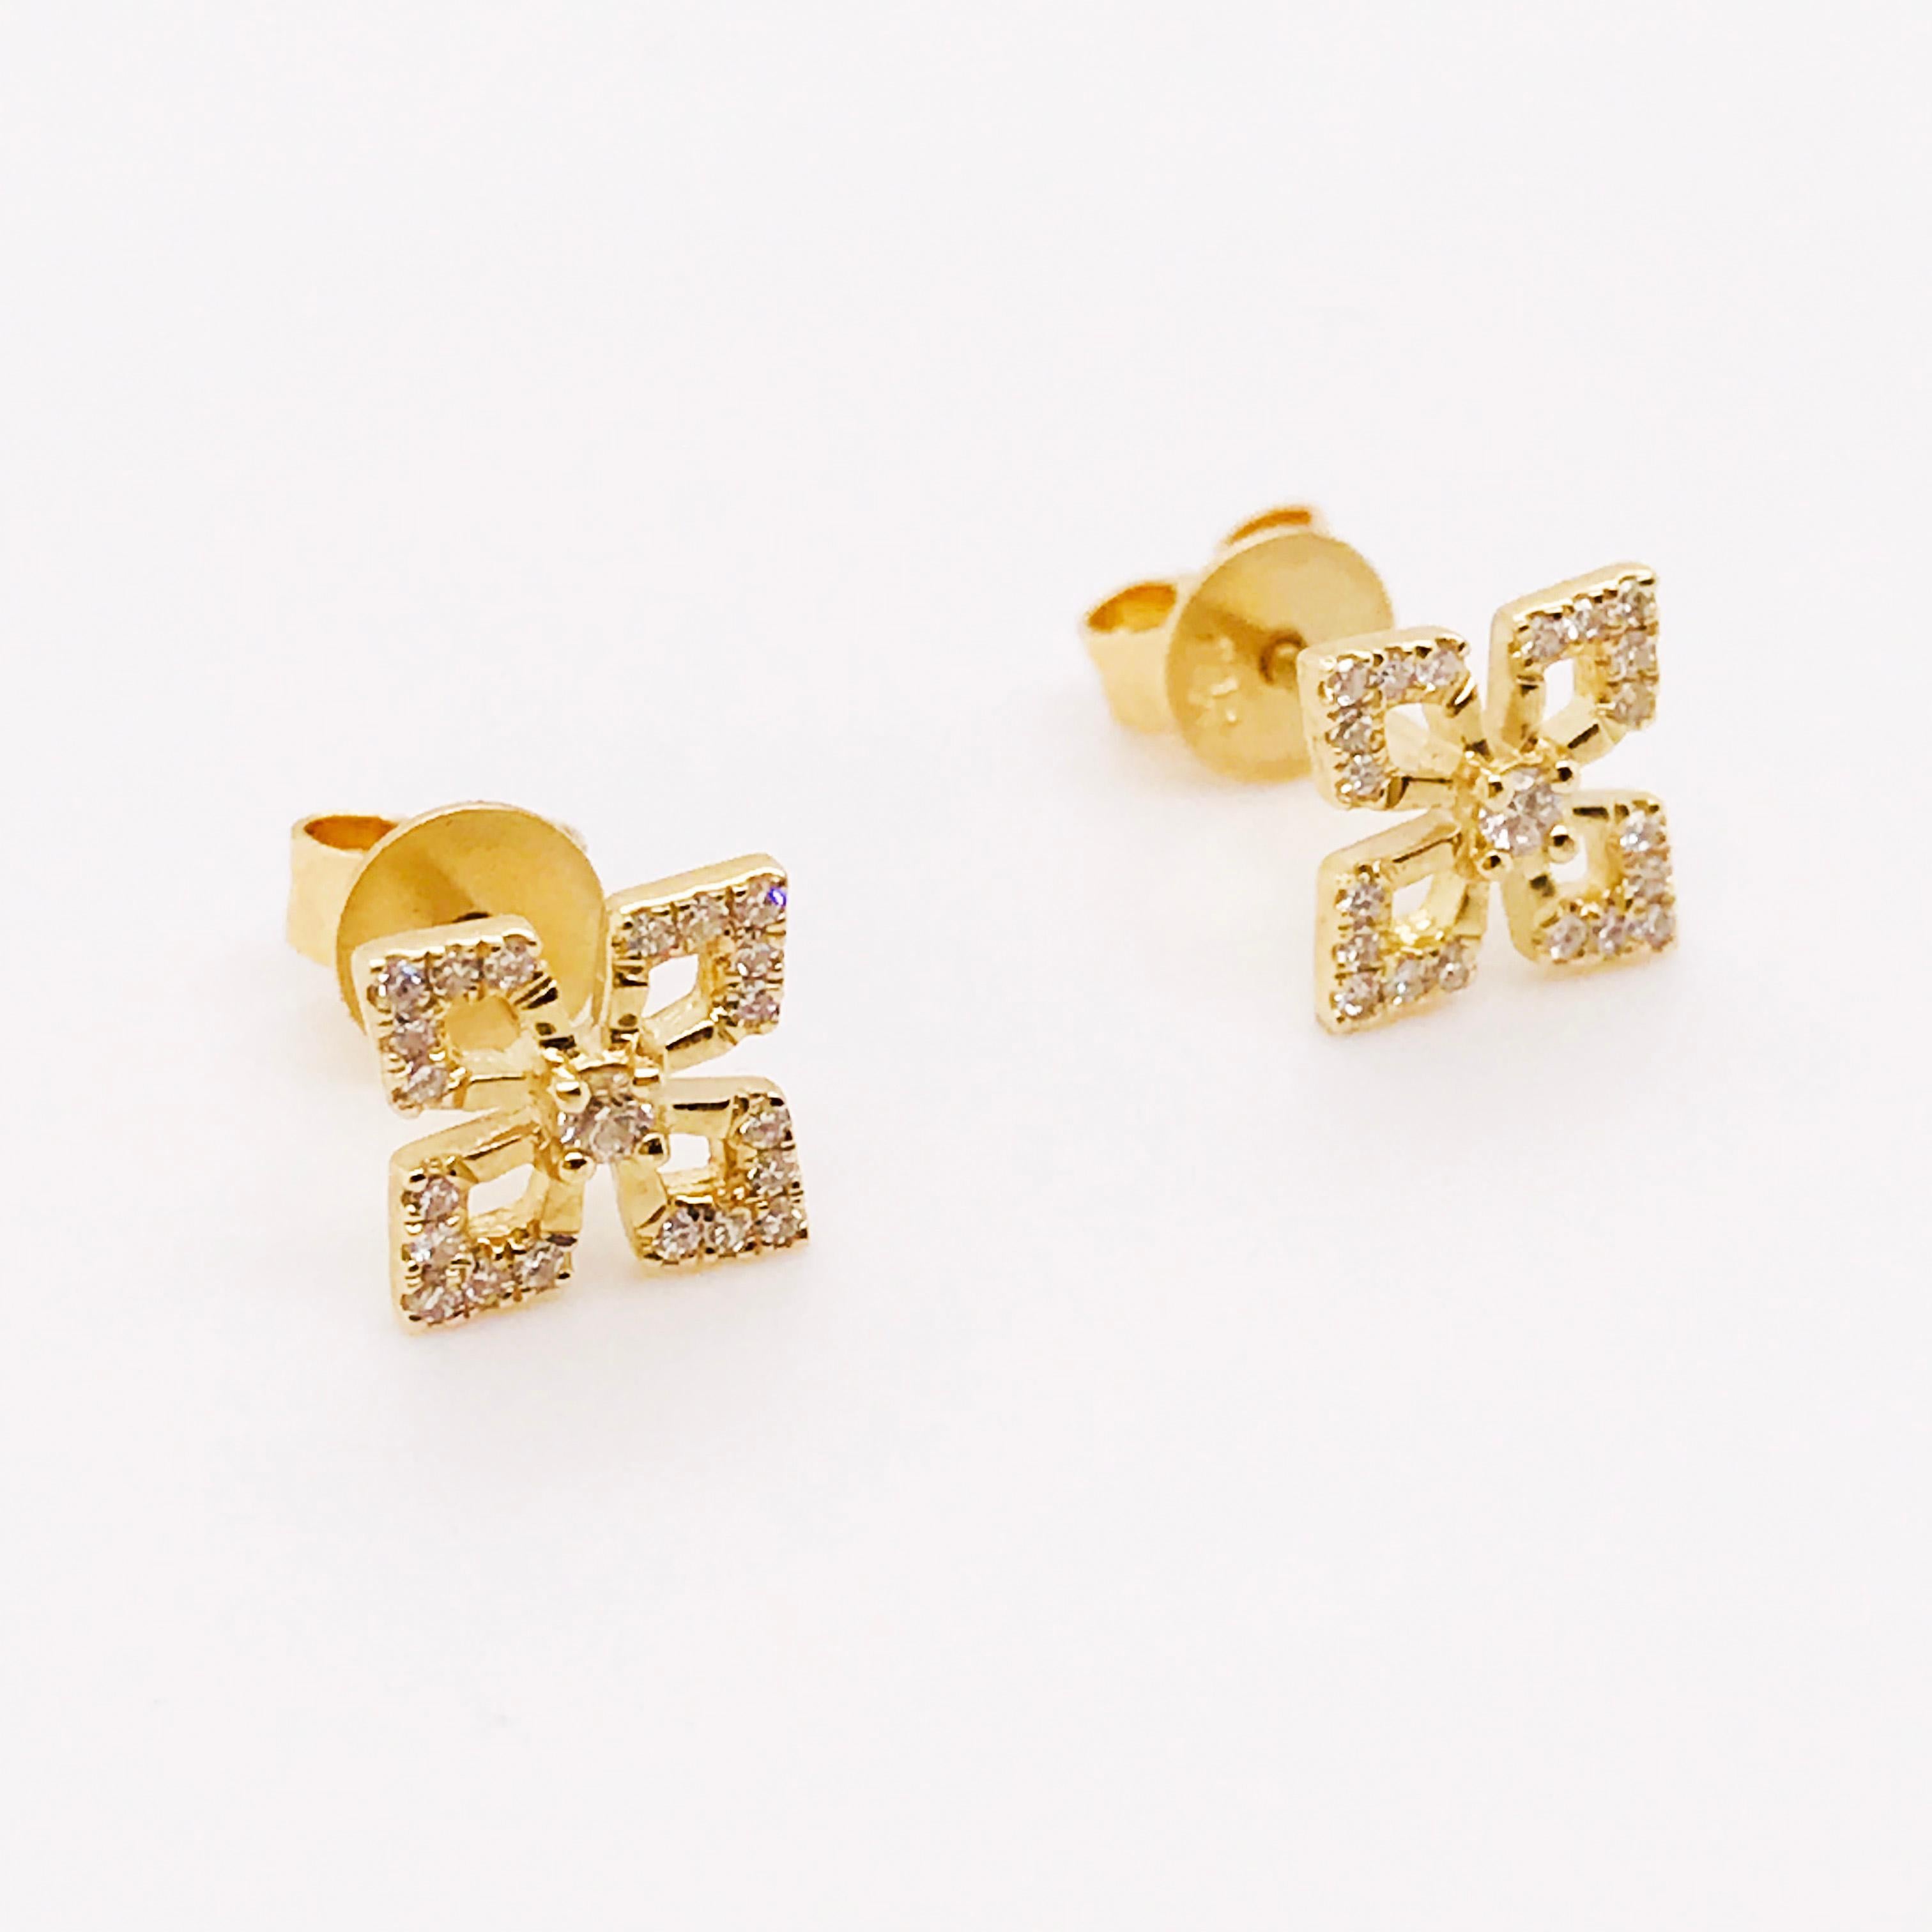 These diamond earrings are unique and gold. The design is a geometric clover (or petal) paved in round brilliant diamonds. These are a great accent piece to any fine jewelry attire. The size of these diamond studs can easily been worn on their own